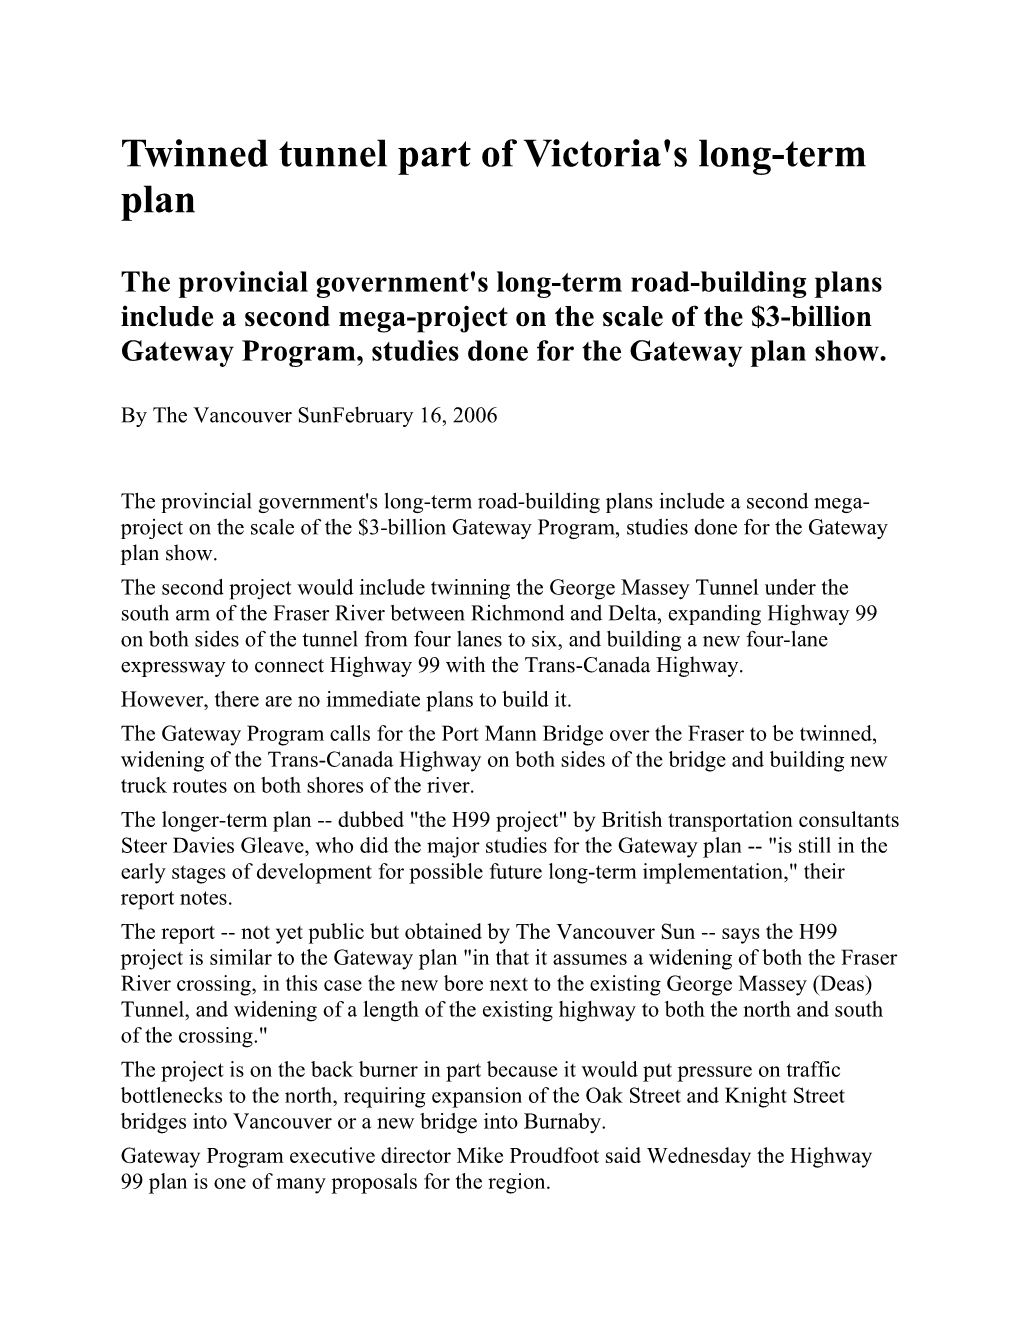 Twinned Tunnel Part of Victoria's Long-Term Plan